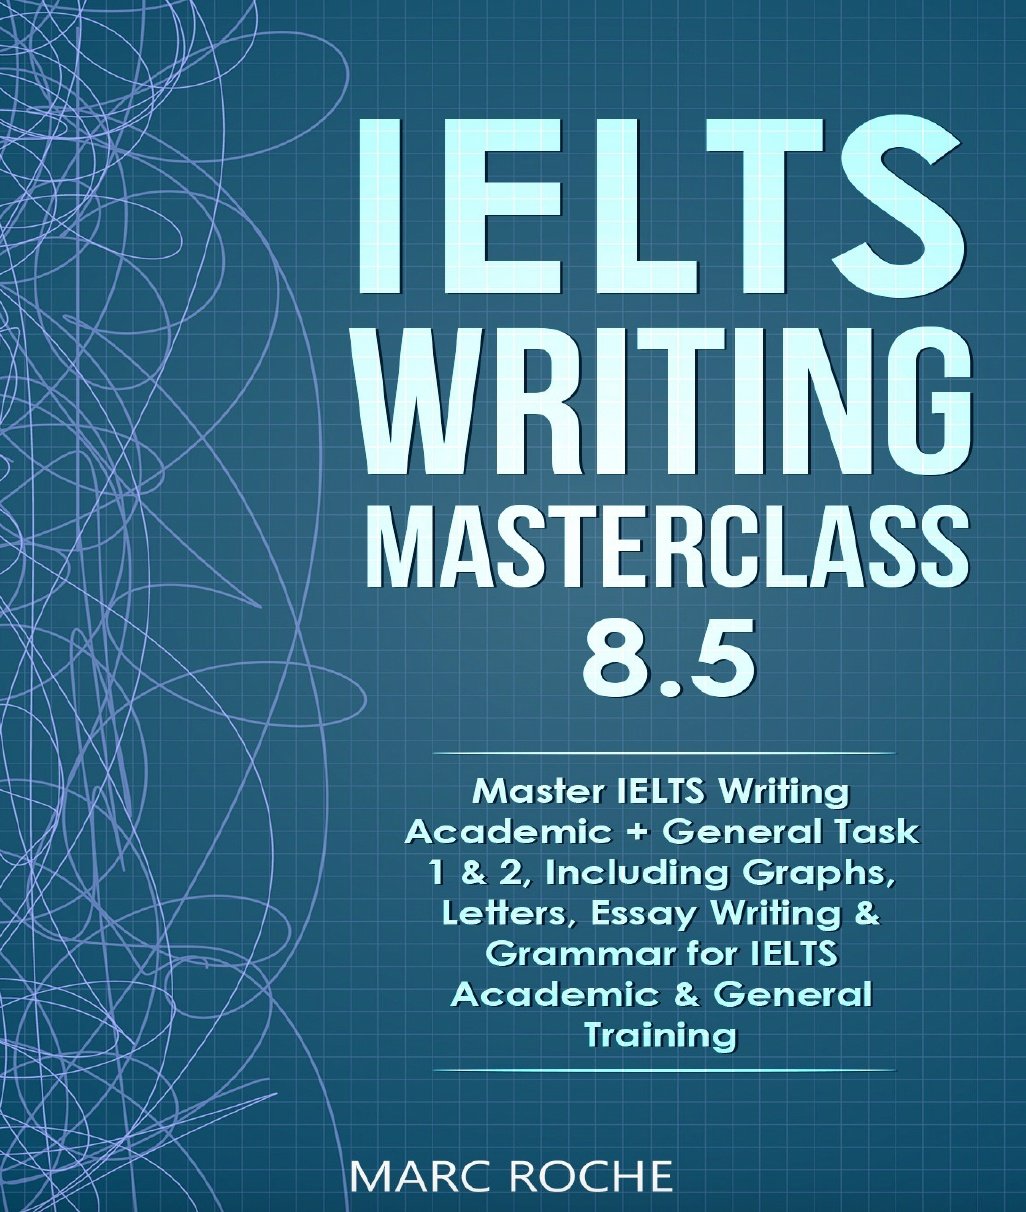 IELTS Writing Masterclass 8.5. Master IELTS Writing Academic + General Task 1 & 2, Including Graphs, Letters, Essay Writing & Grammar for IELTS Academic